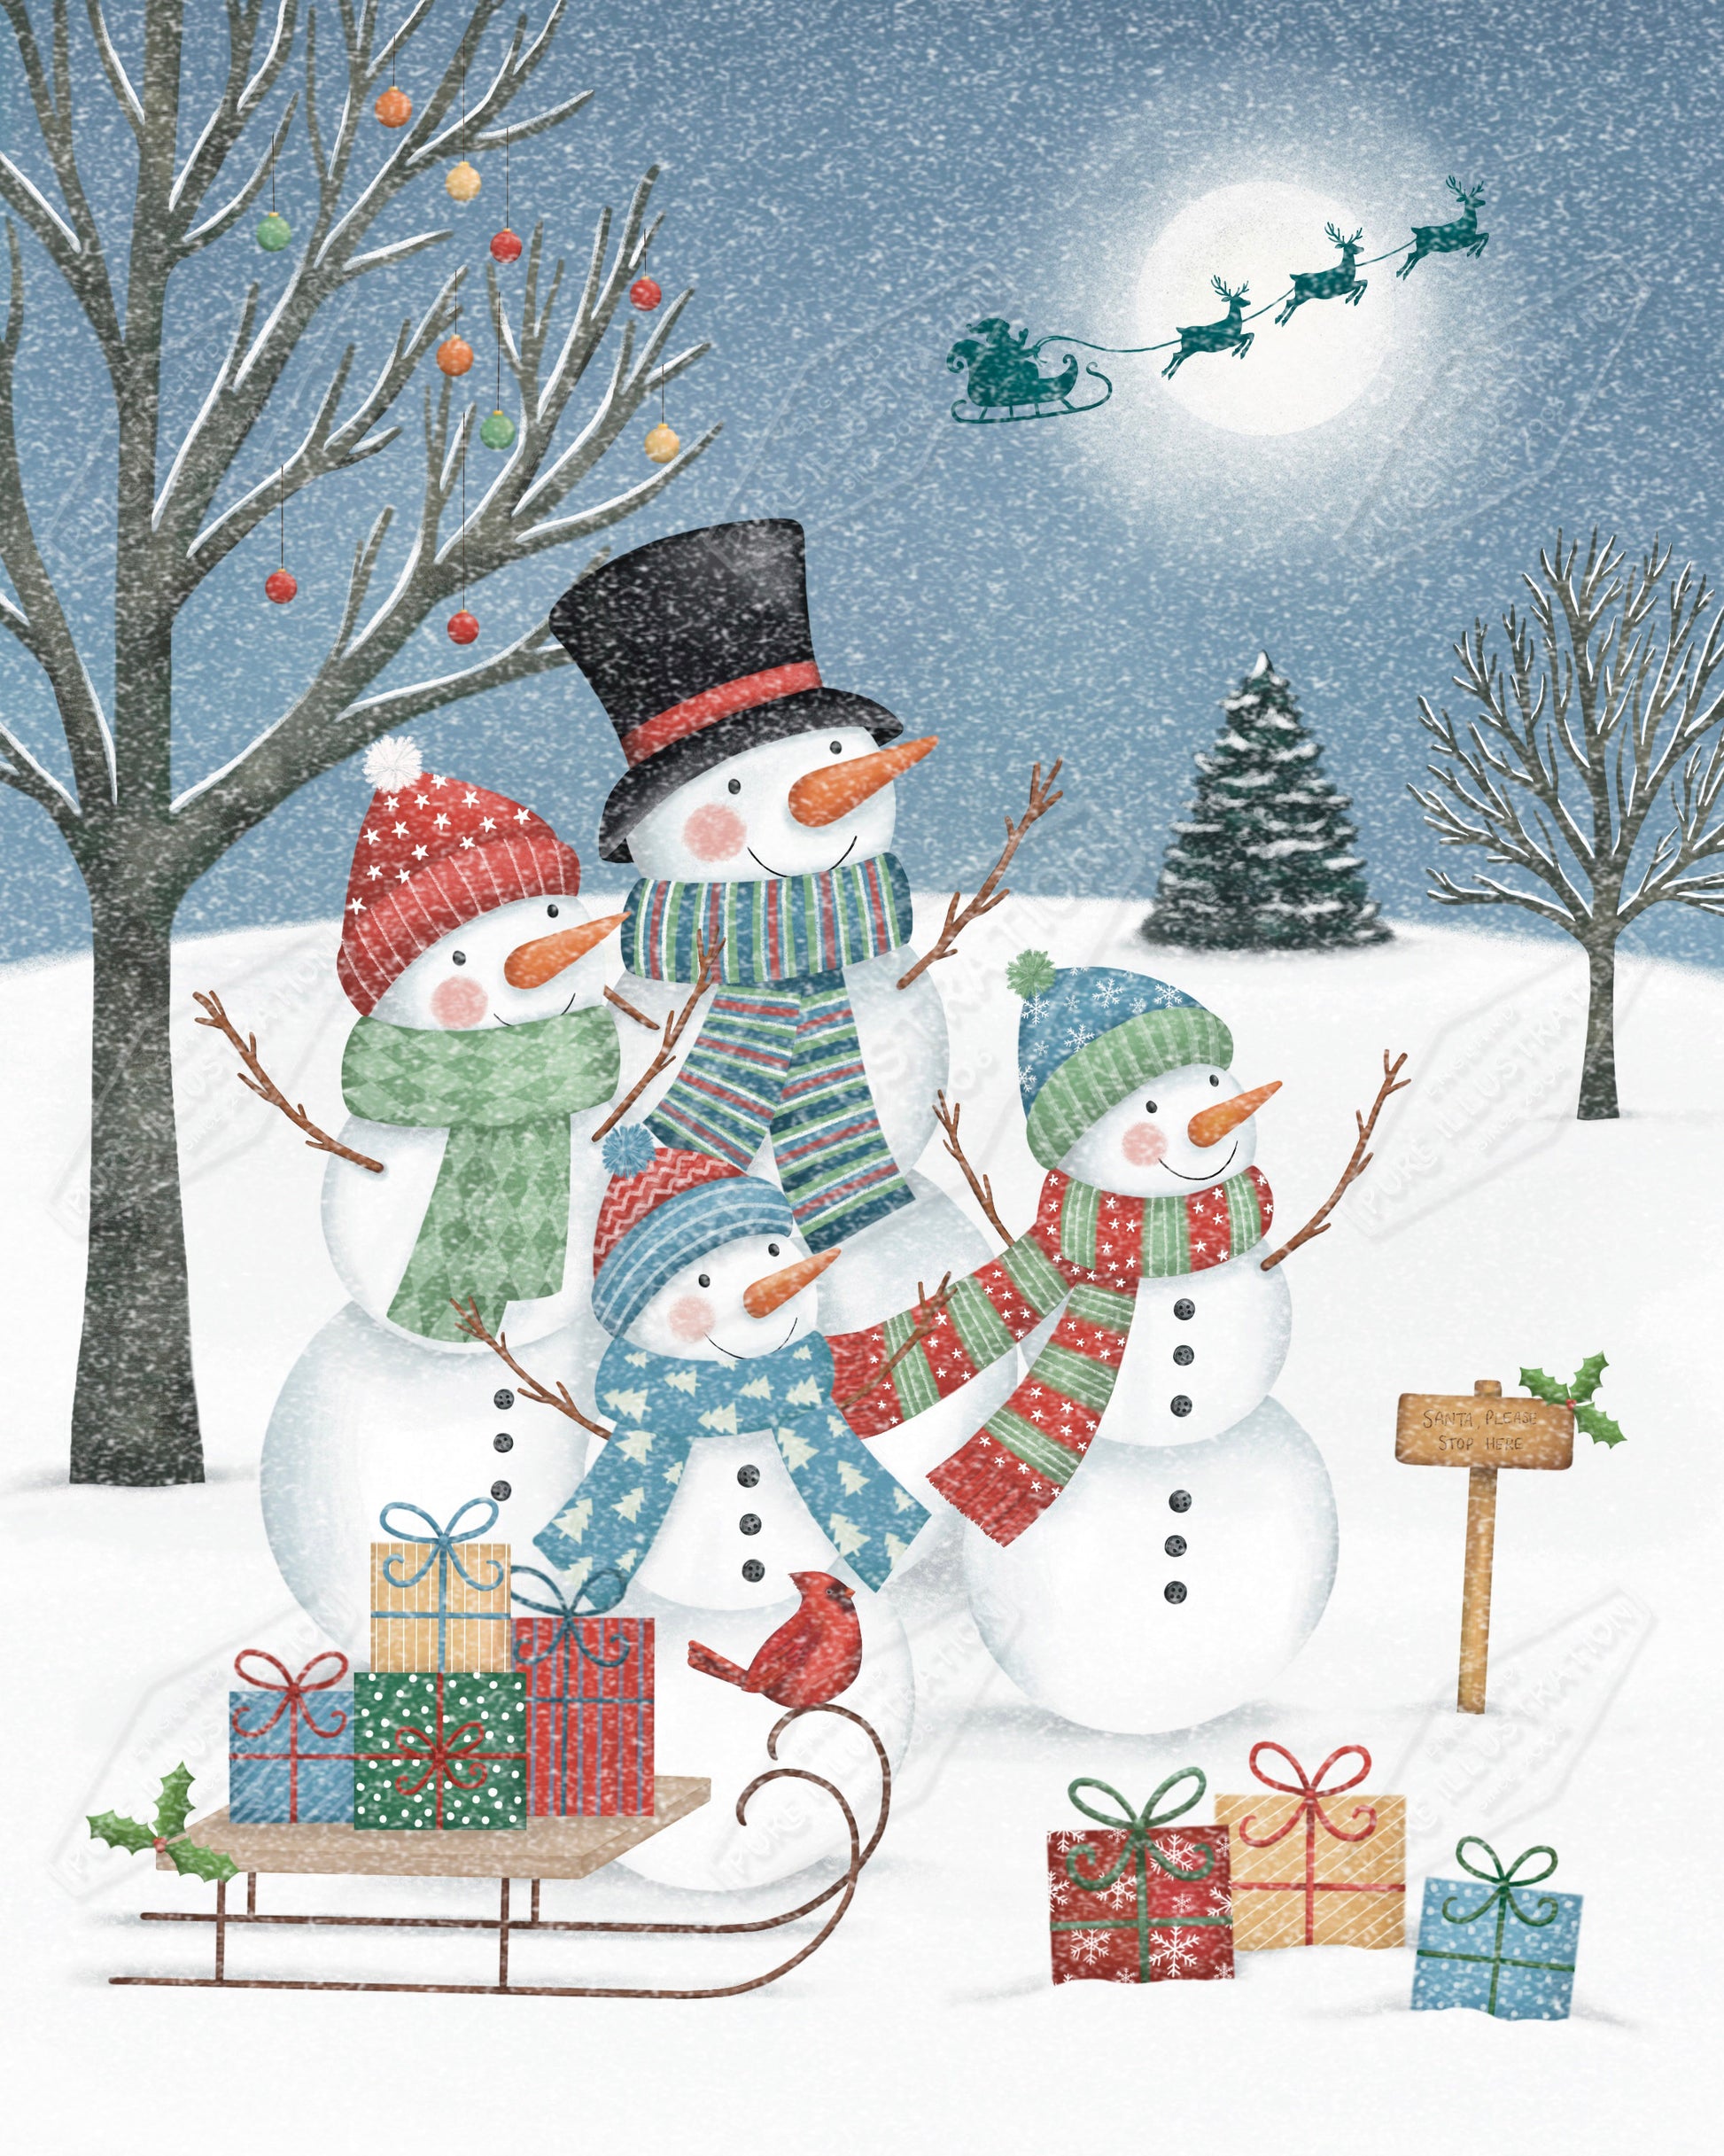 00035974AAI - Anna Aitken is represented by Pure Art Licensing Agency - Christmas Greeting Card Design